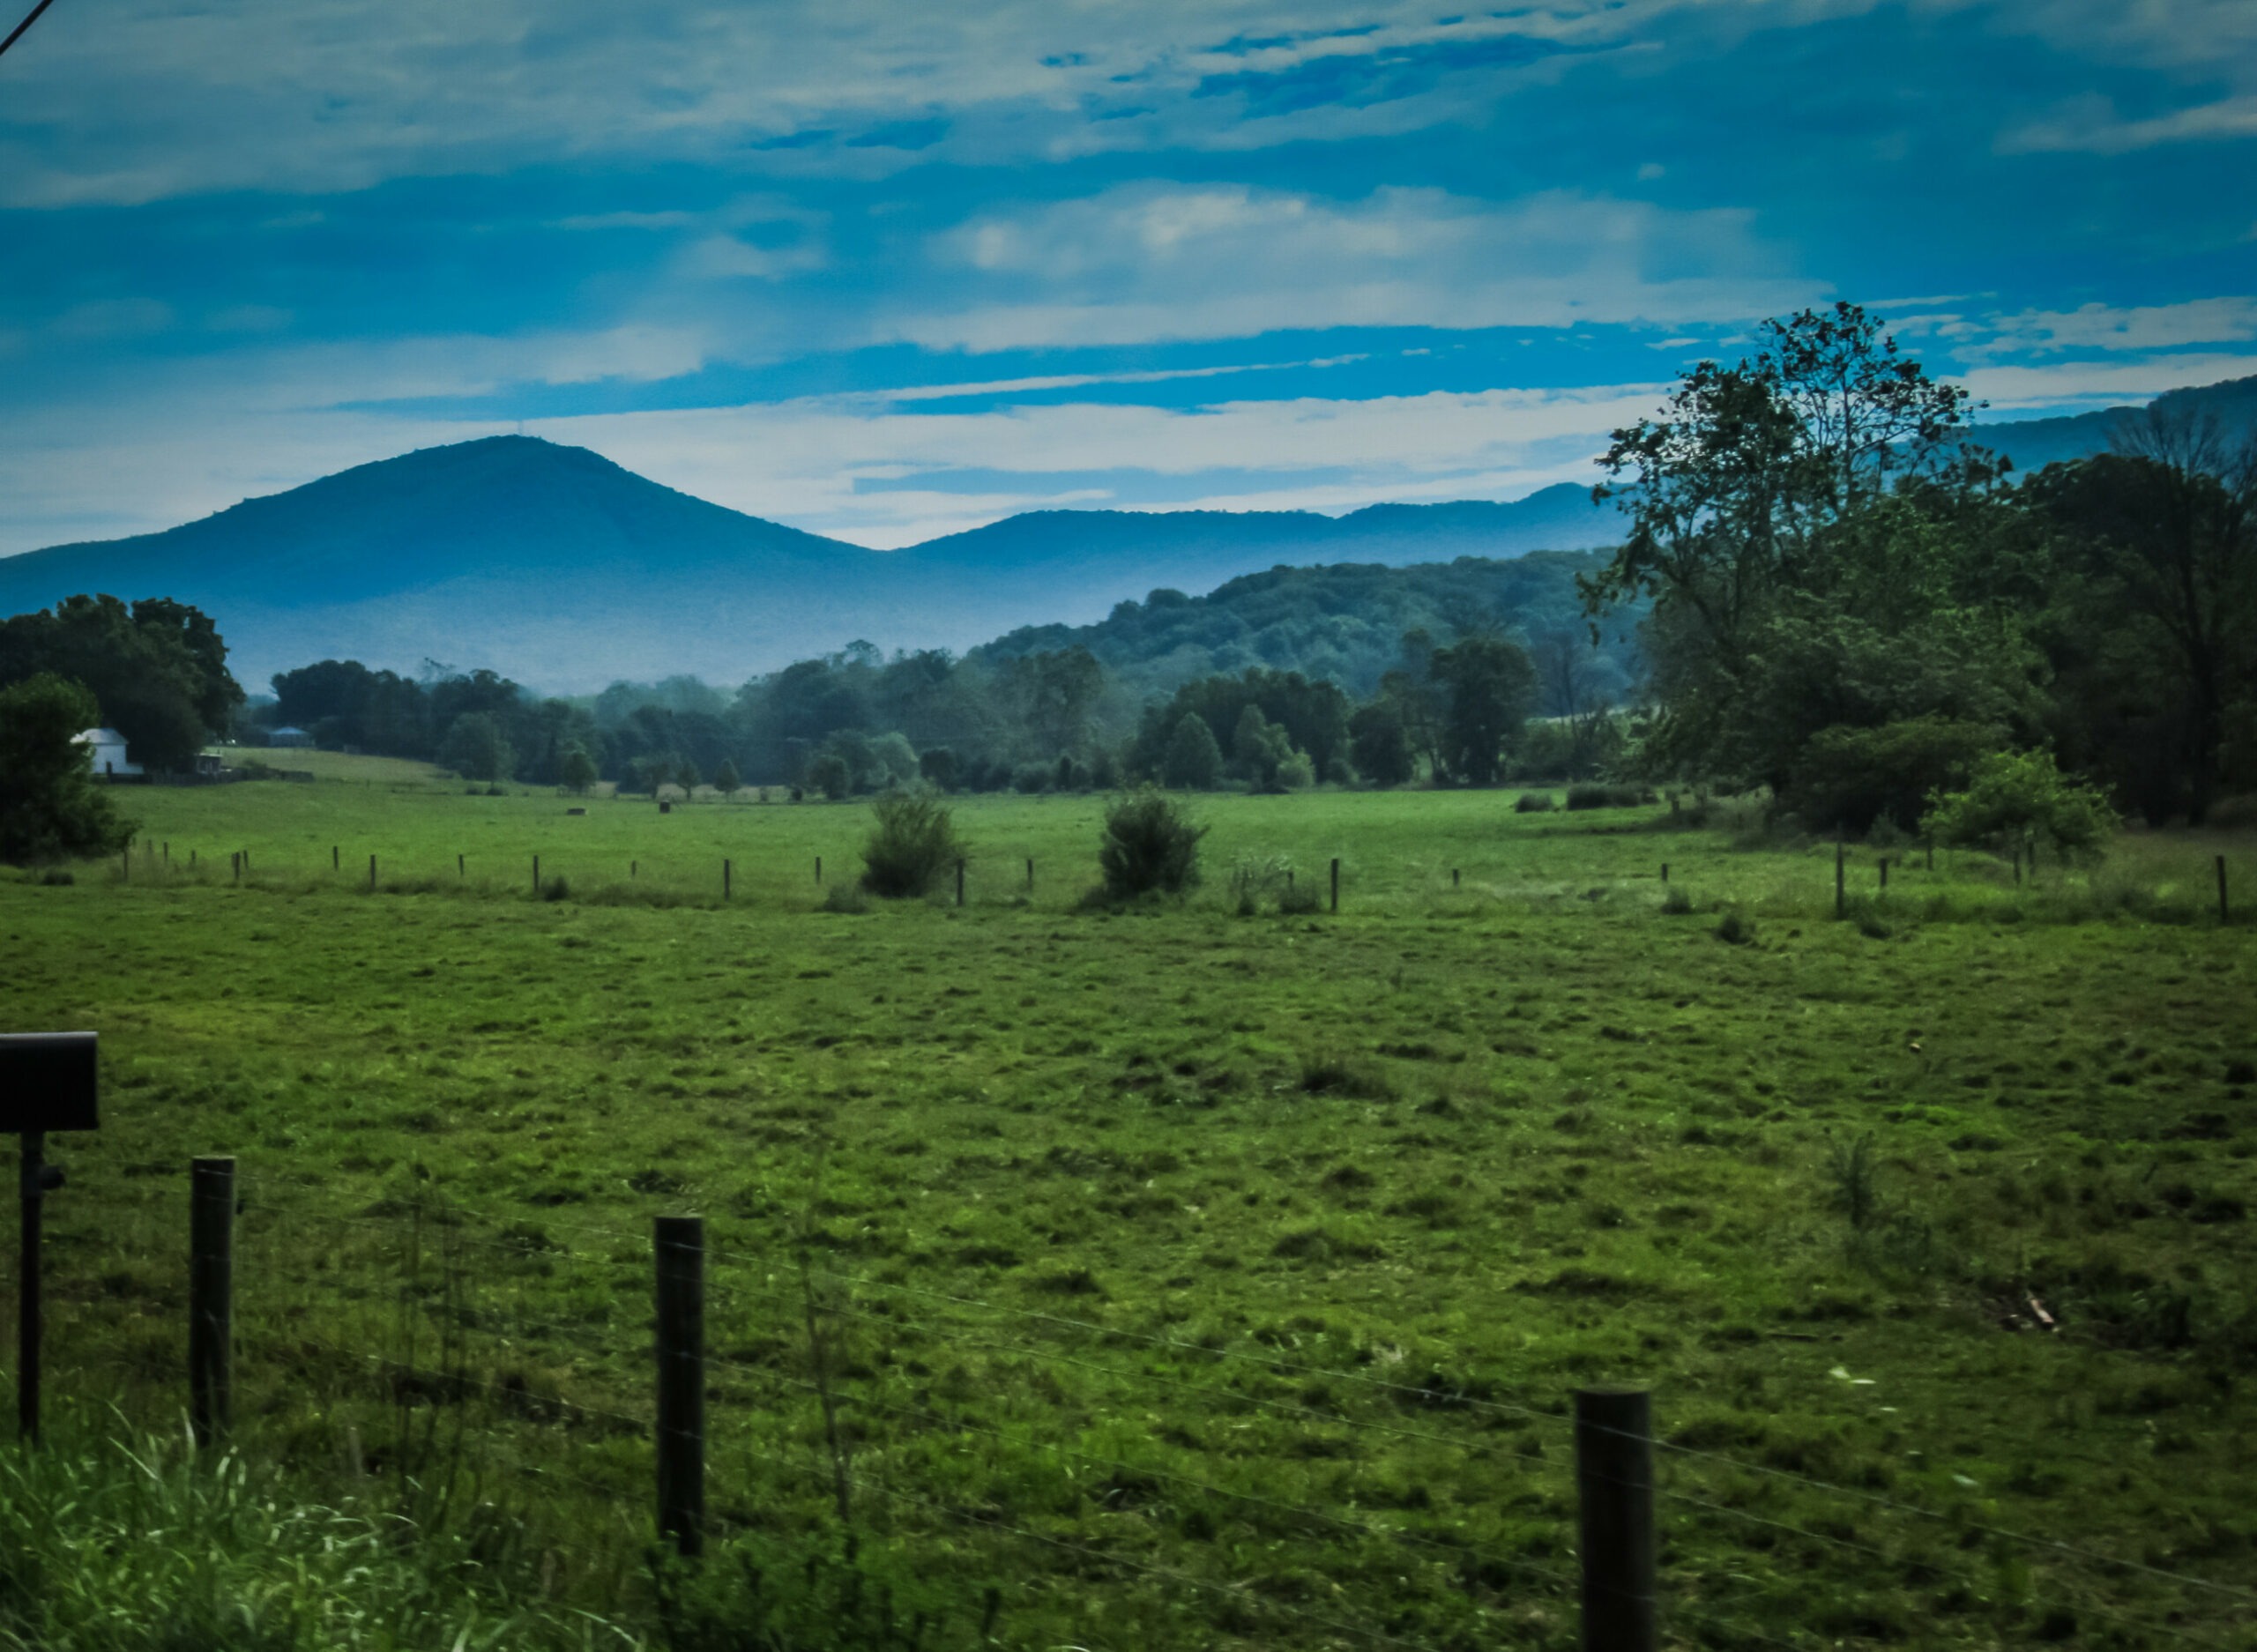 A lush green field behind a farm fence with a treelined and blue mountain in the background under a dusky teal sky.